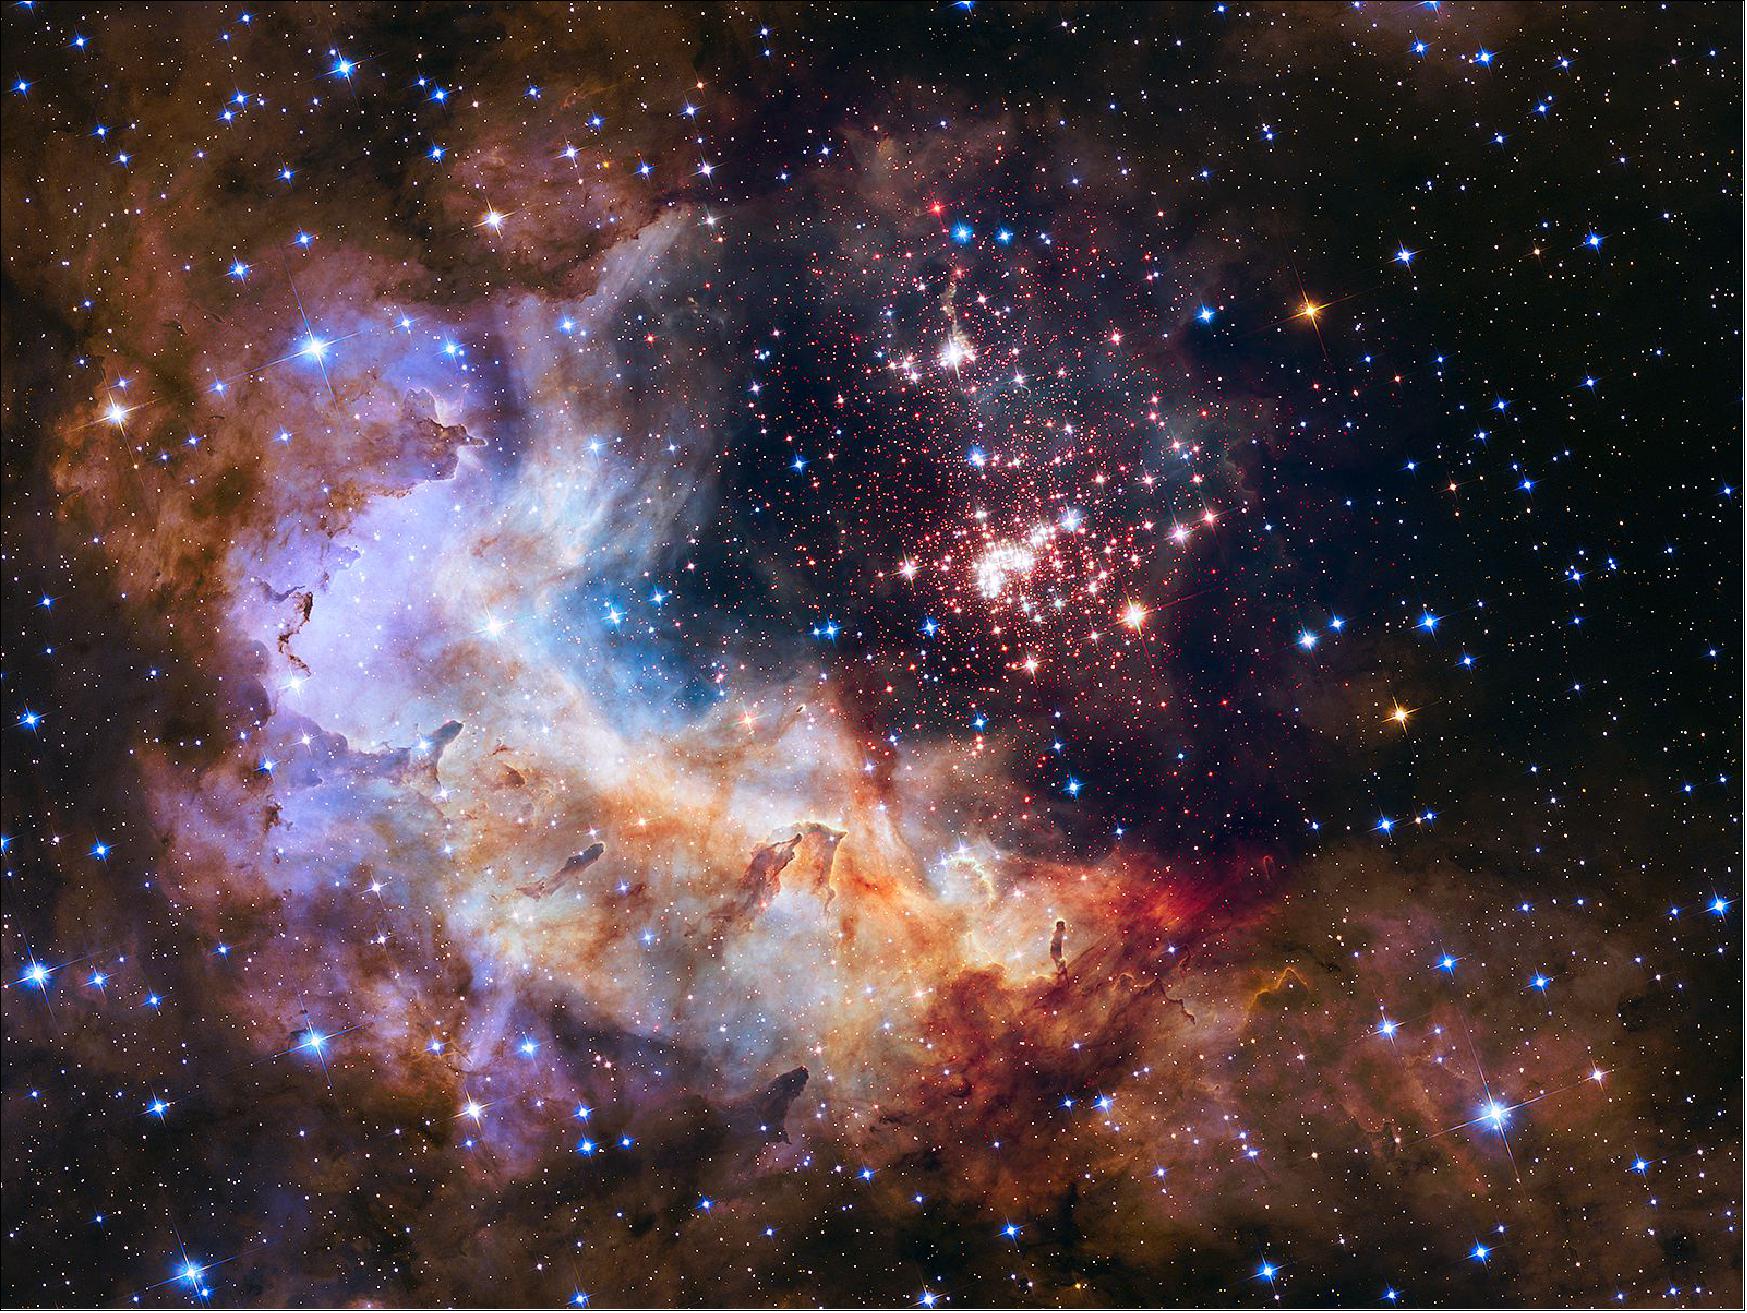 Figure 49: NASA unveils Celestial Fireworks as Official Image for Hubble's 25th Anniversary on April 24, 2015. The image was acquired with WFC-3 (Wide Field Camera-3) piercing through the dusty veil shrouding the stellar nursery in near-infrared light, giving astronomers a clear view of the nebula and the dense concentration of stars in the central cluster. (image credit: NASA, ESA, STScI) 69) 70) 71)